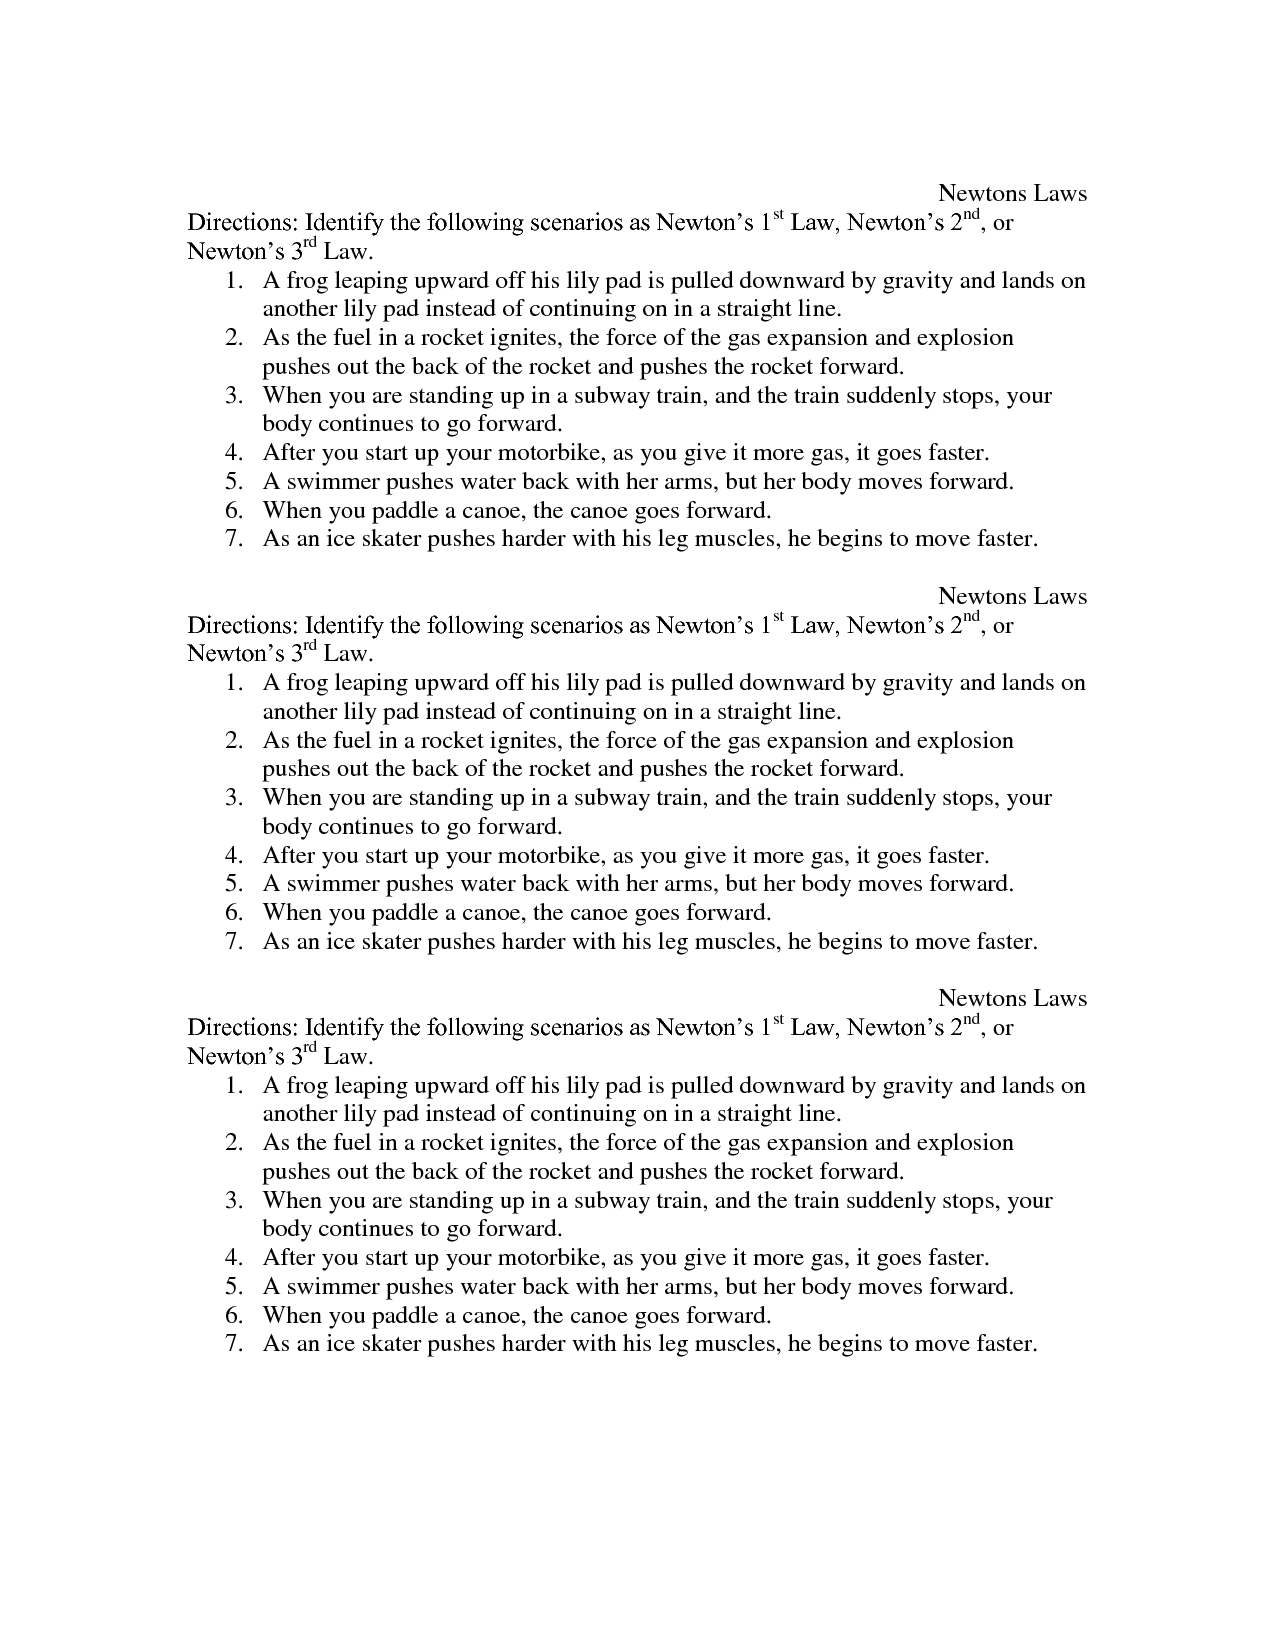 Newtons Laws Worksheet Answers Image